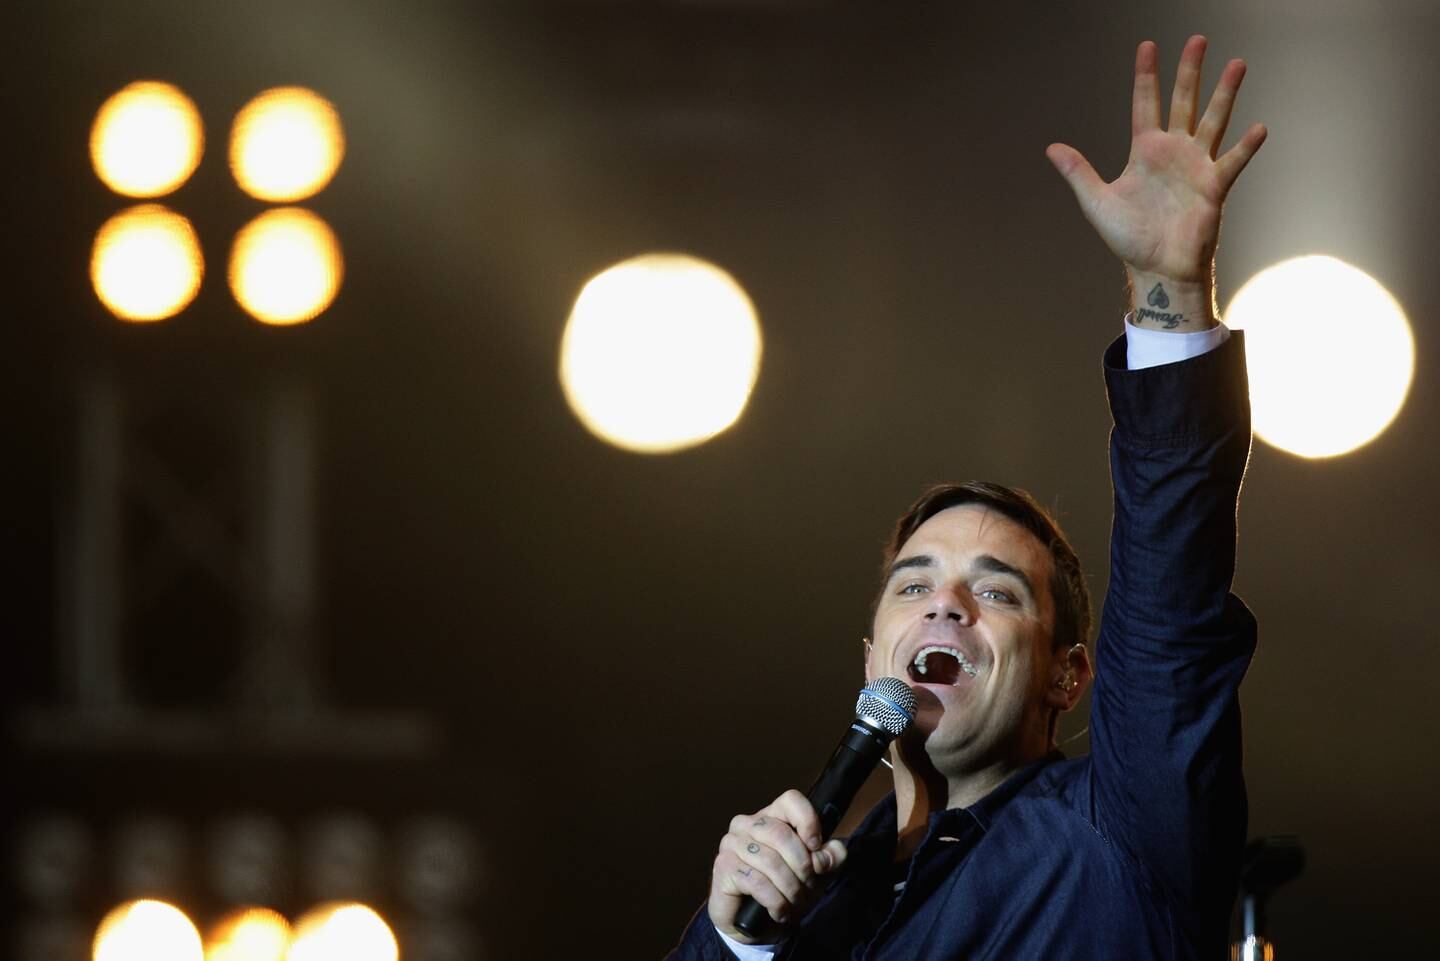 British singer Robbie Williams will perform at Atlantis, The Palm in Dubai on New Year's Eve. Getty Images